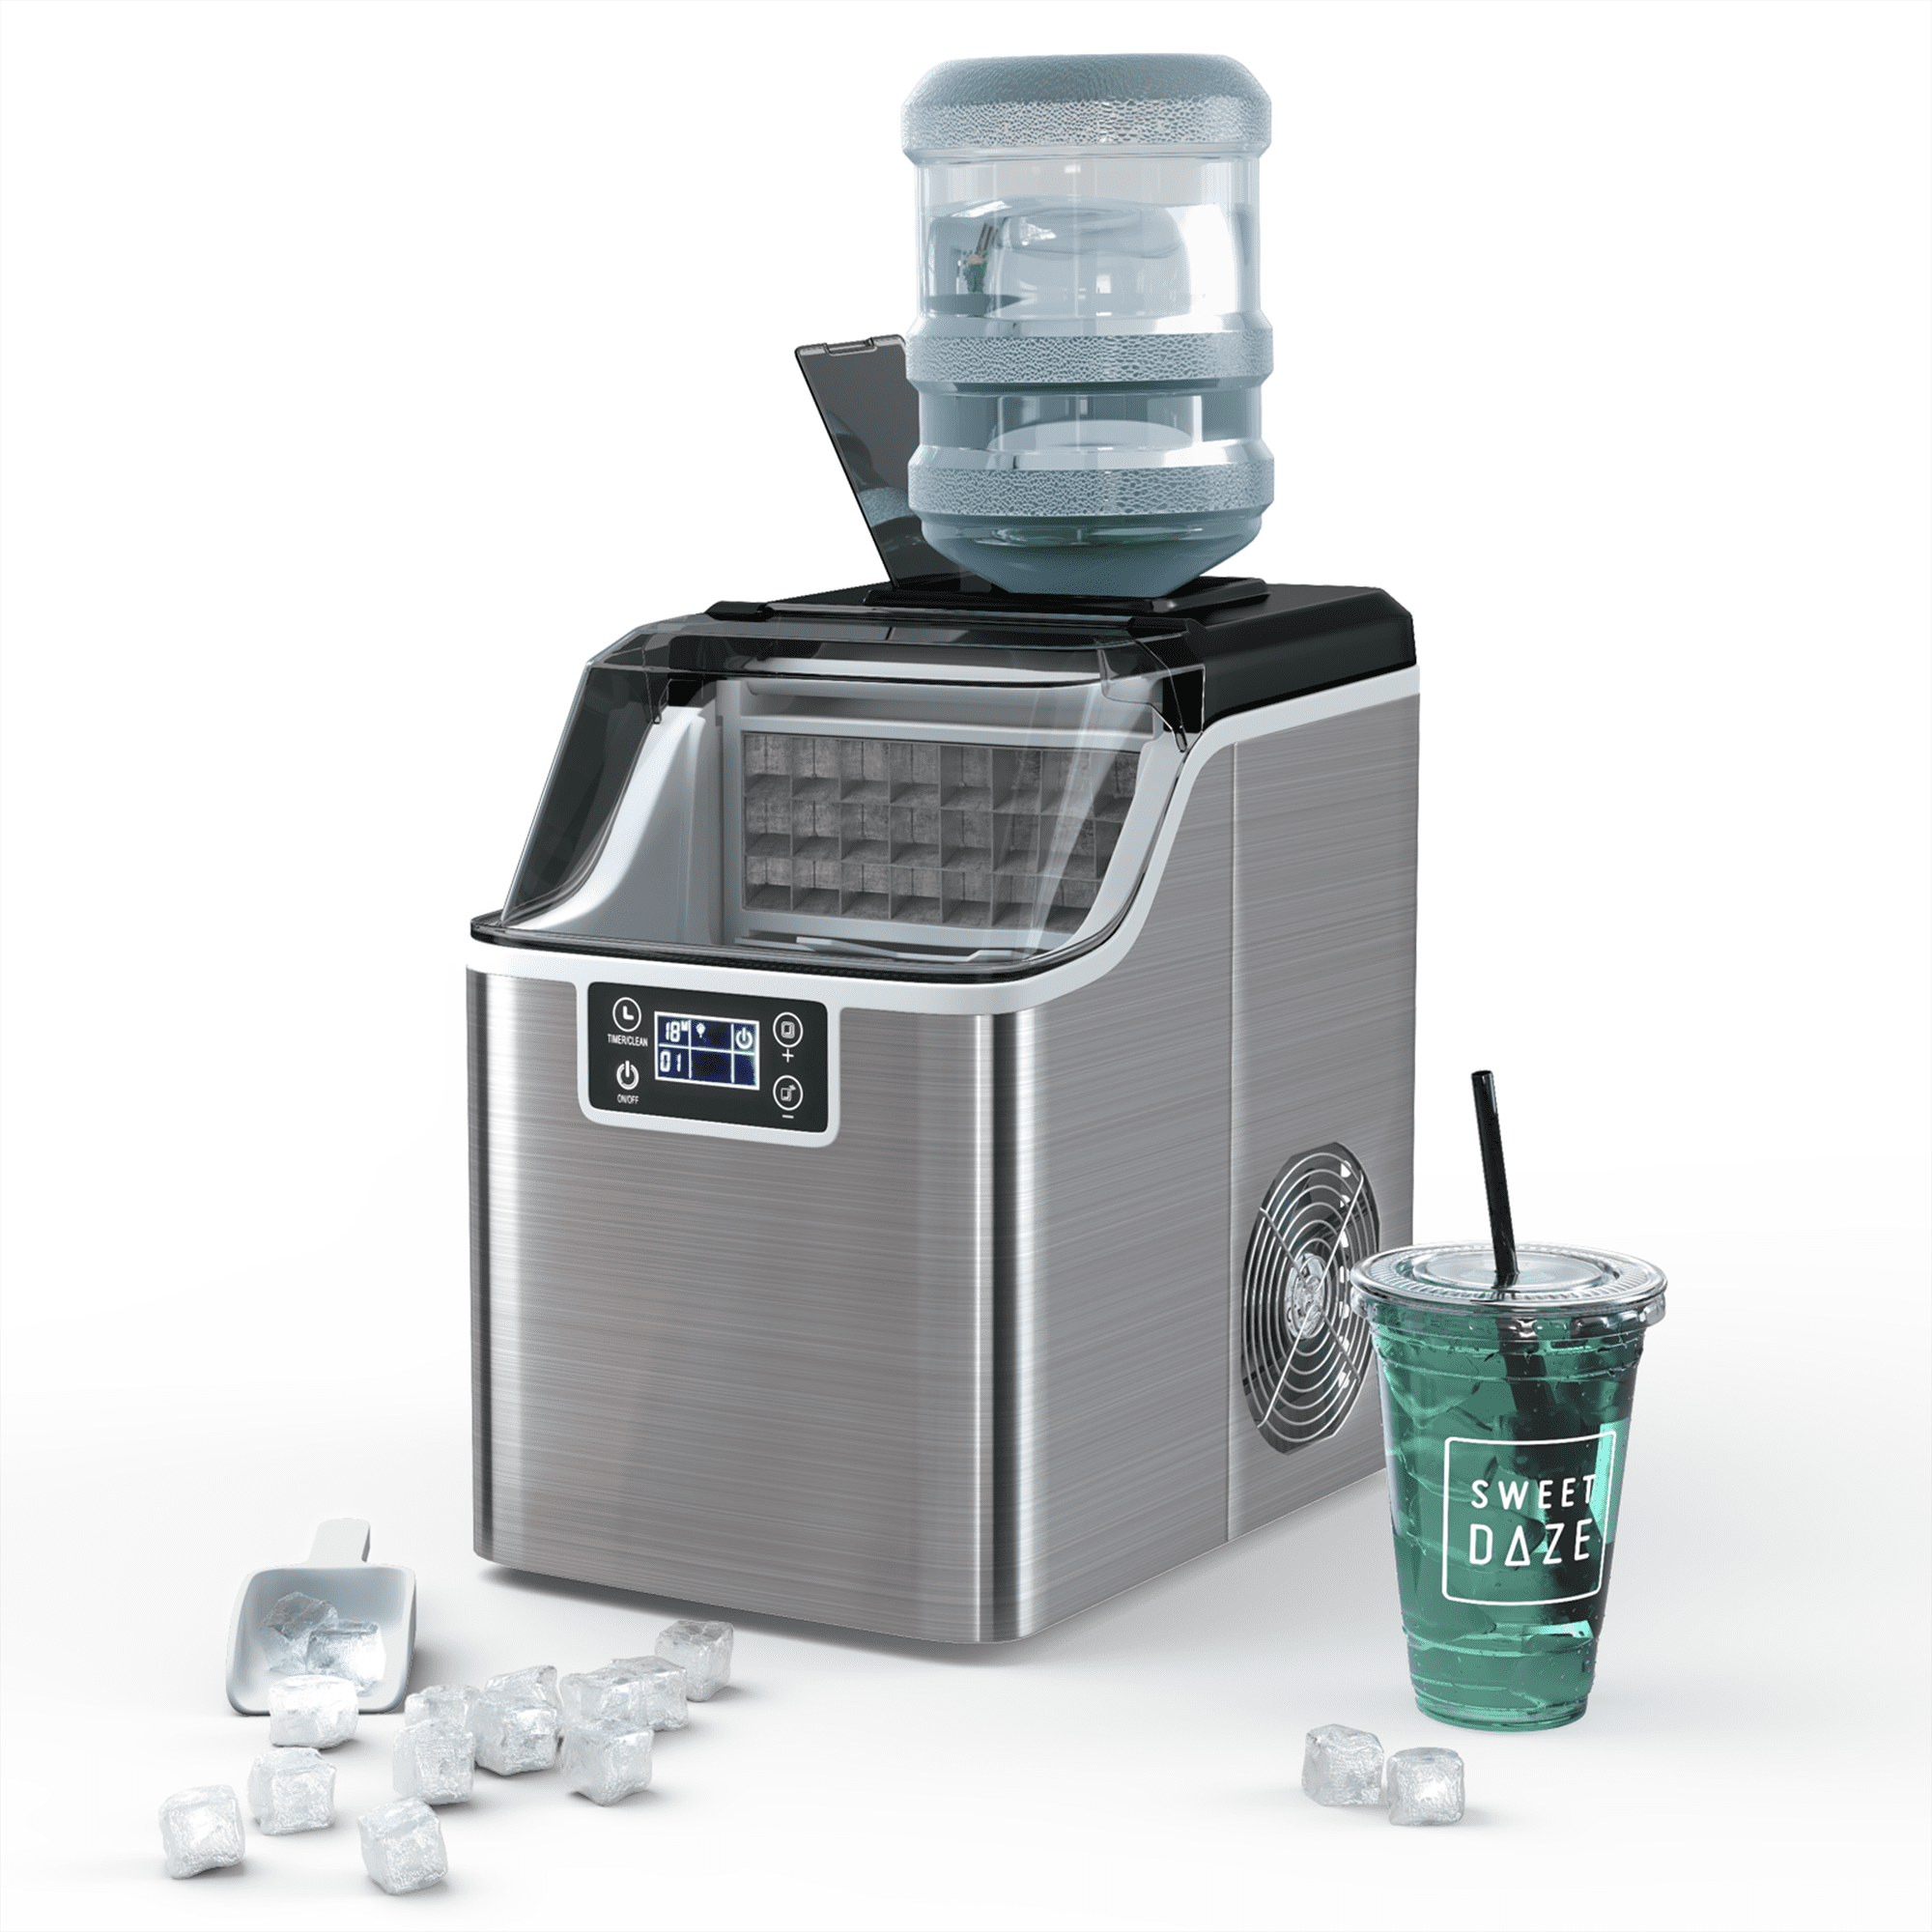 HiCOZY Countertop Ice Maker, Ice in 6 Mins, 24 lbs/day, Portable & Compact with Self-Cleaning, Ice Scoop, and Basket